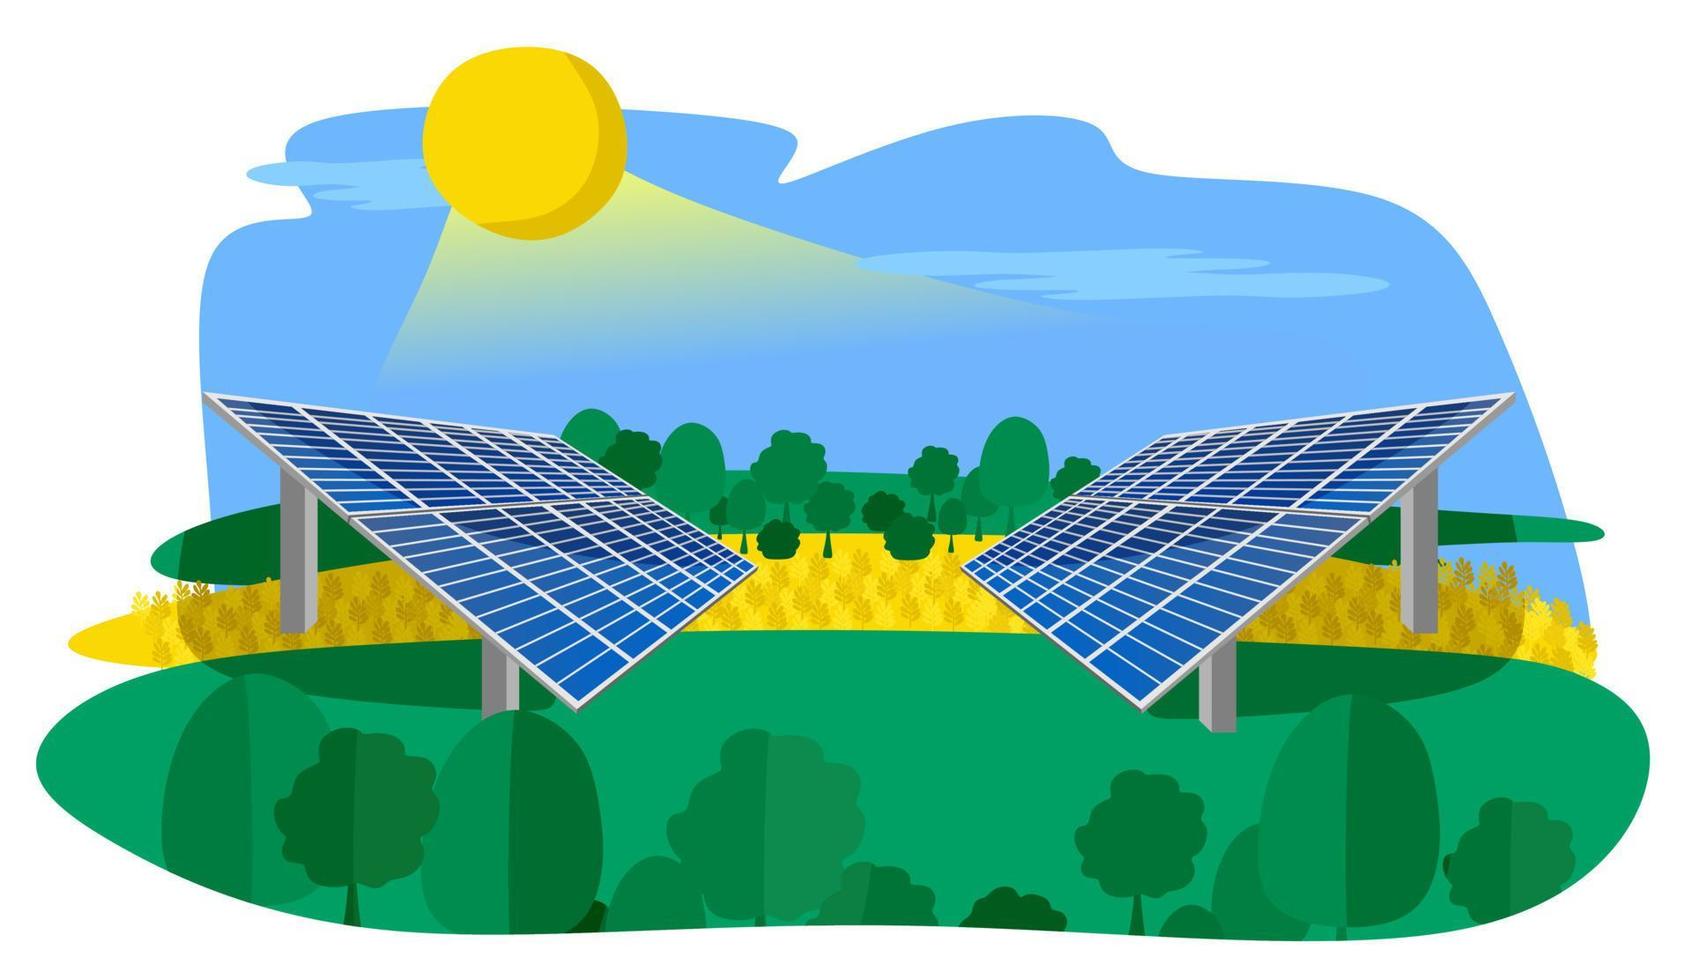 Renewable energy sources with solar panels installed in the field. The concept of alternative clean energy. Vector flat illustration.